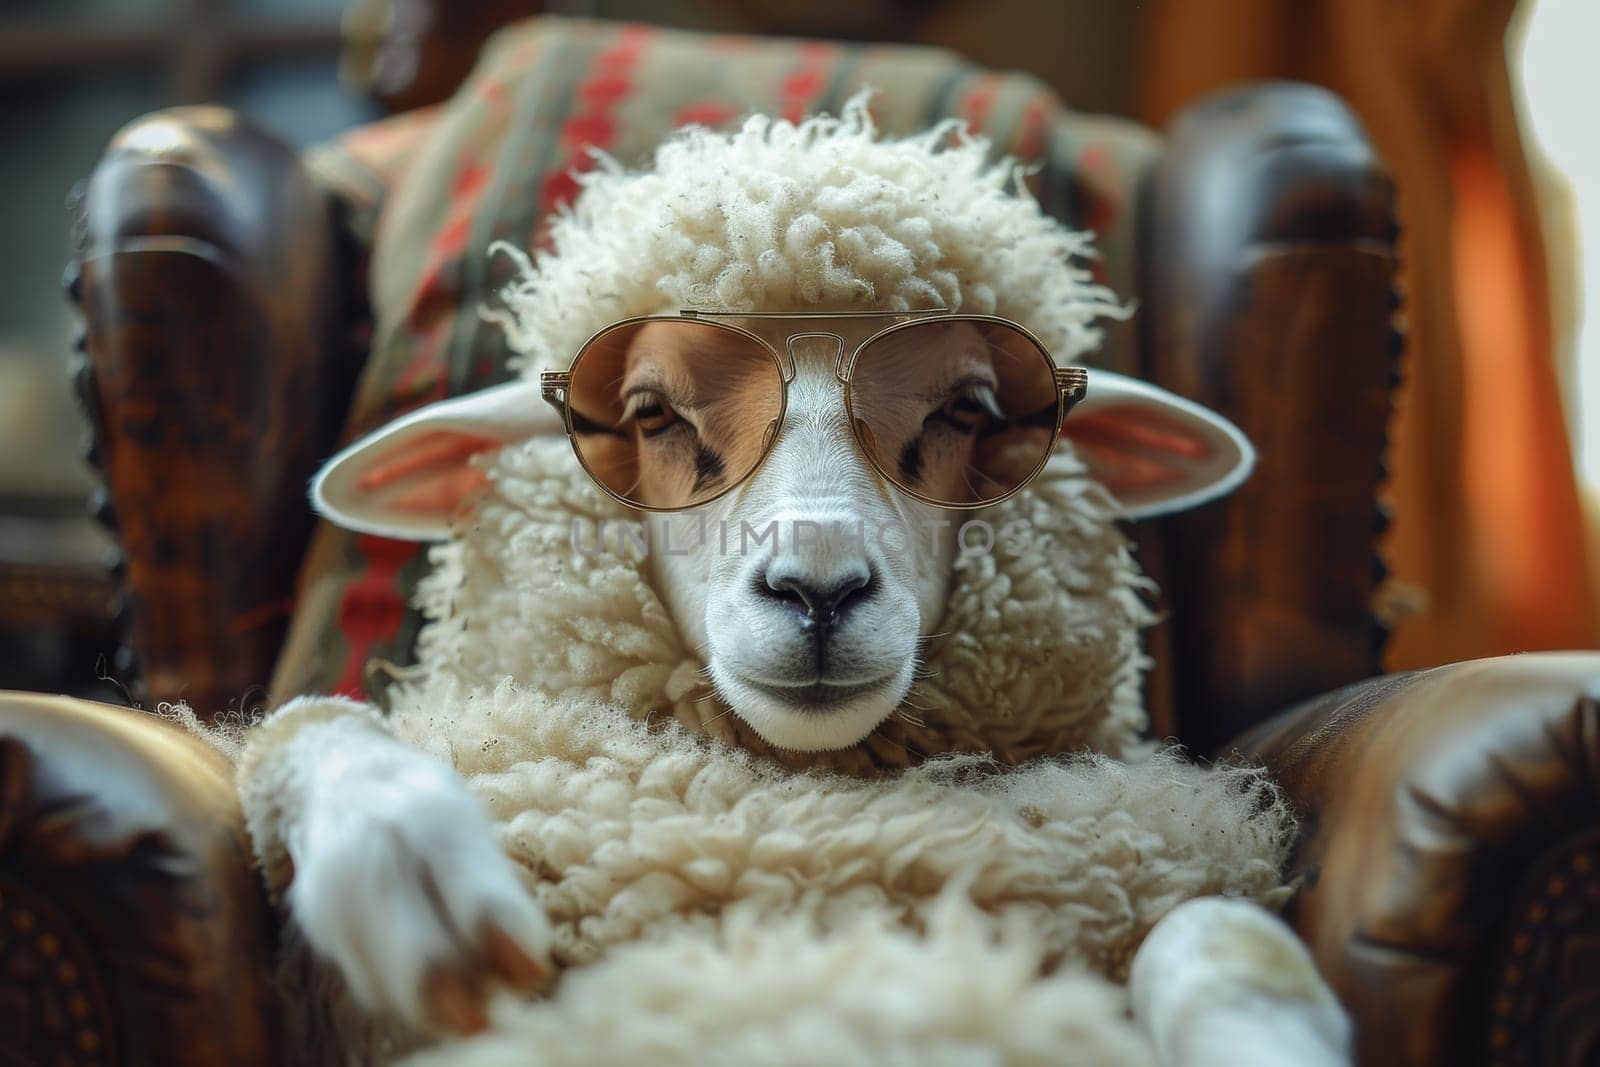 A sheep wearing sunglasses is sitting on a leather chair. The sheep is wearing a pair of sunglasses and he is relaxed and comfortable